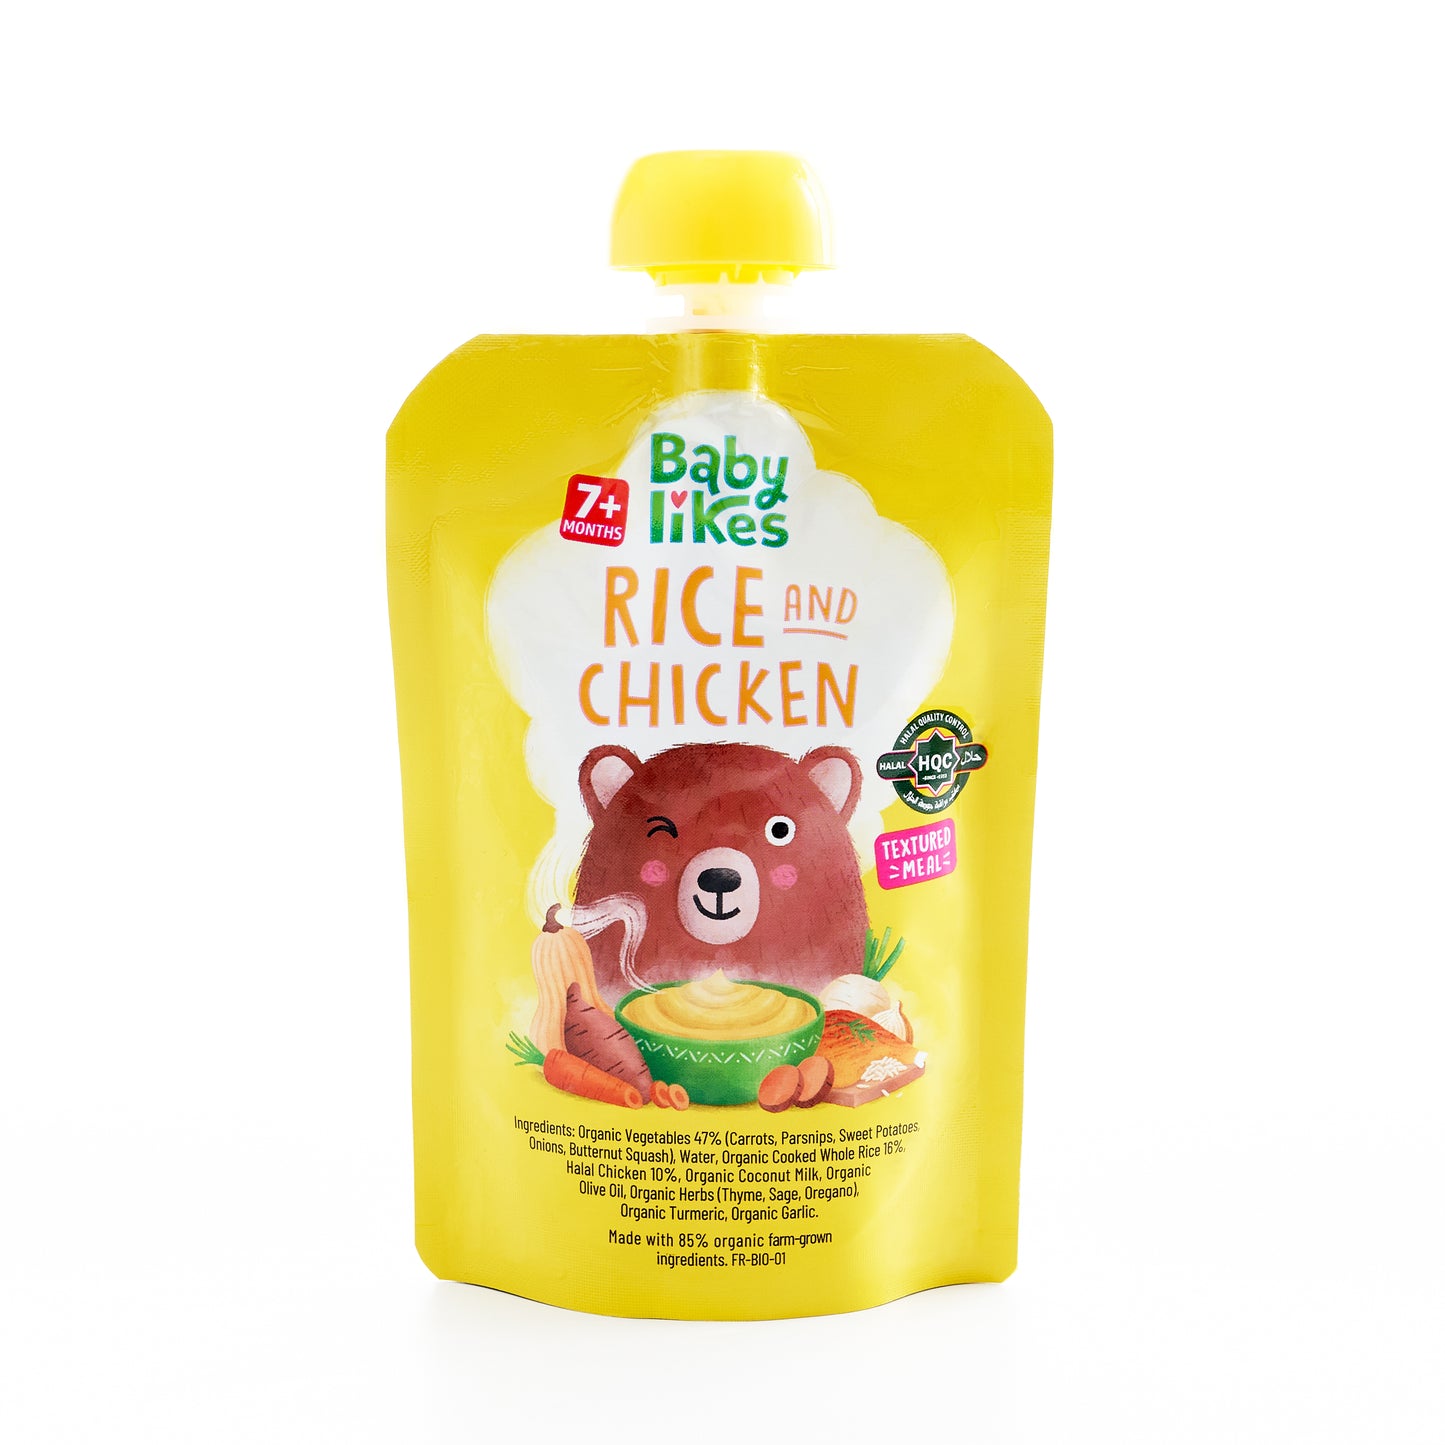 Rice and Chicken 130 grams - Halal Organic Puree for 7+ months